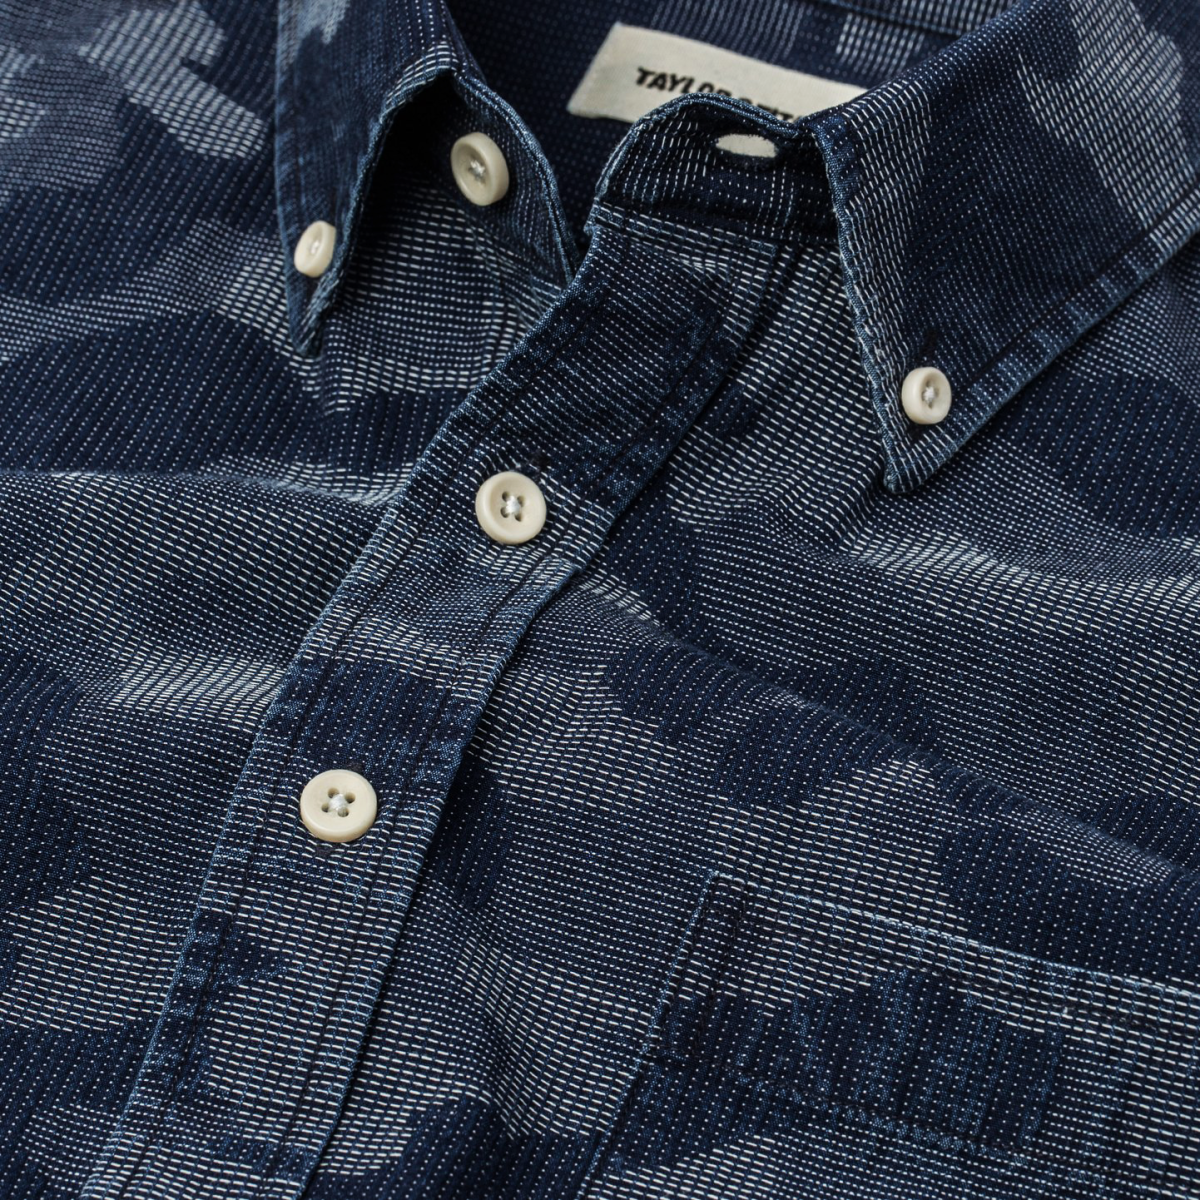 Taylor Stitch's Indigo Jacquard Shirt Is the Right Way to Do Camo This ...